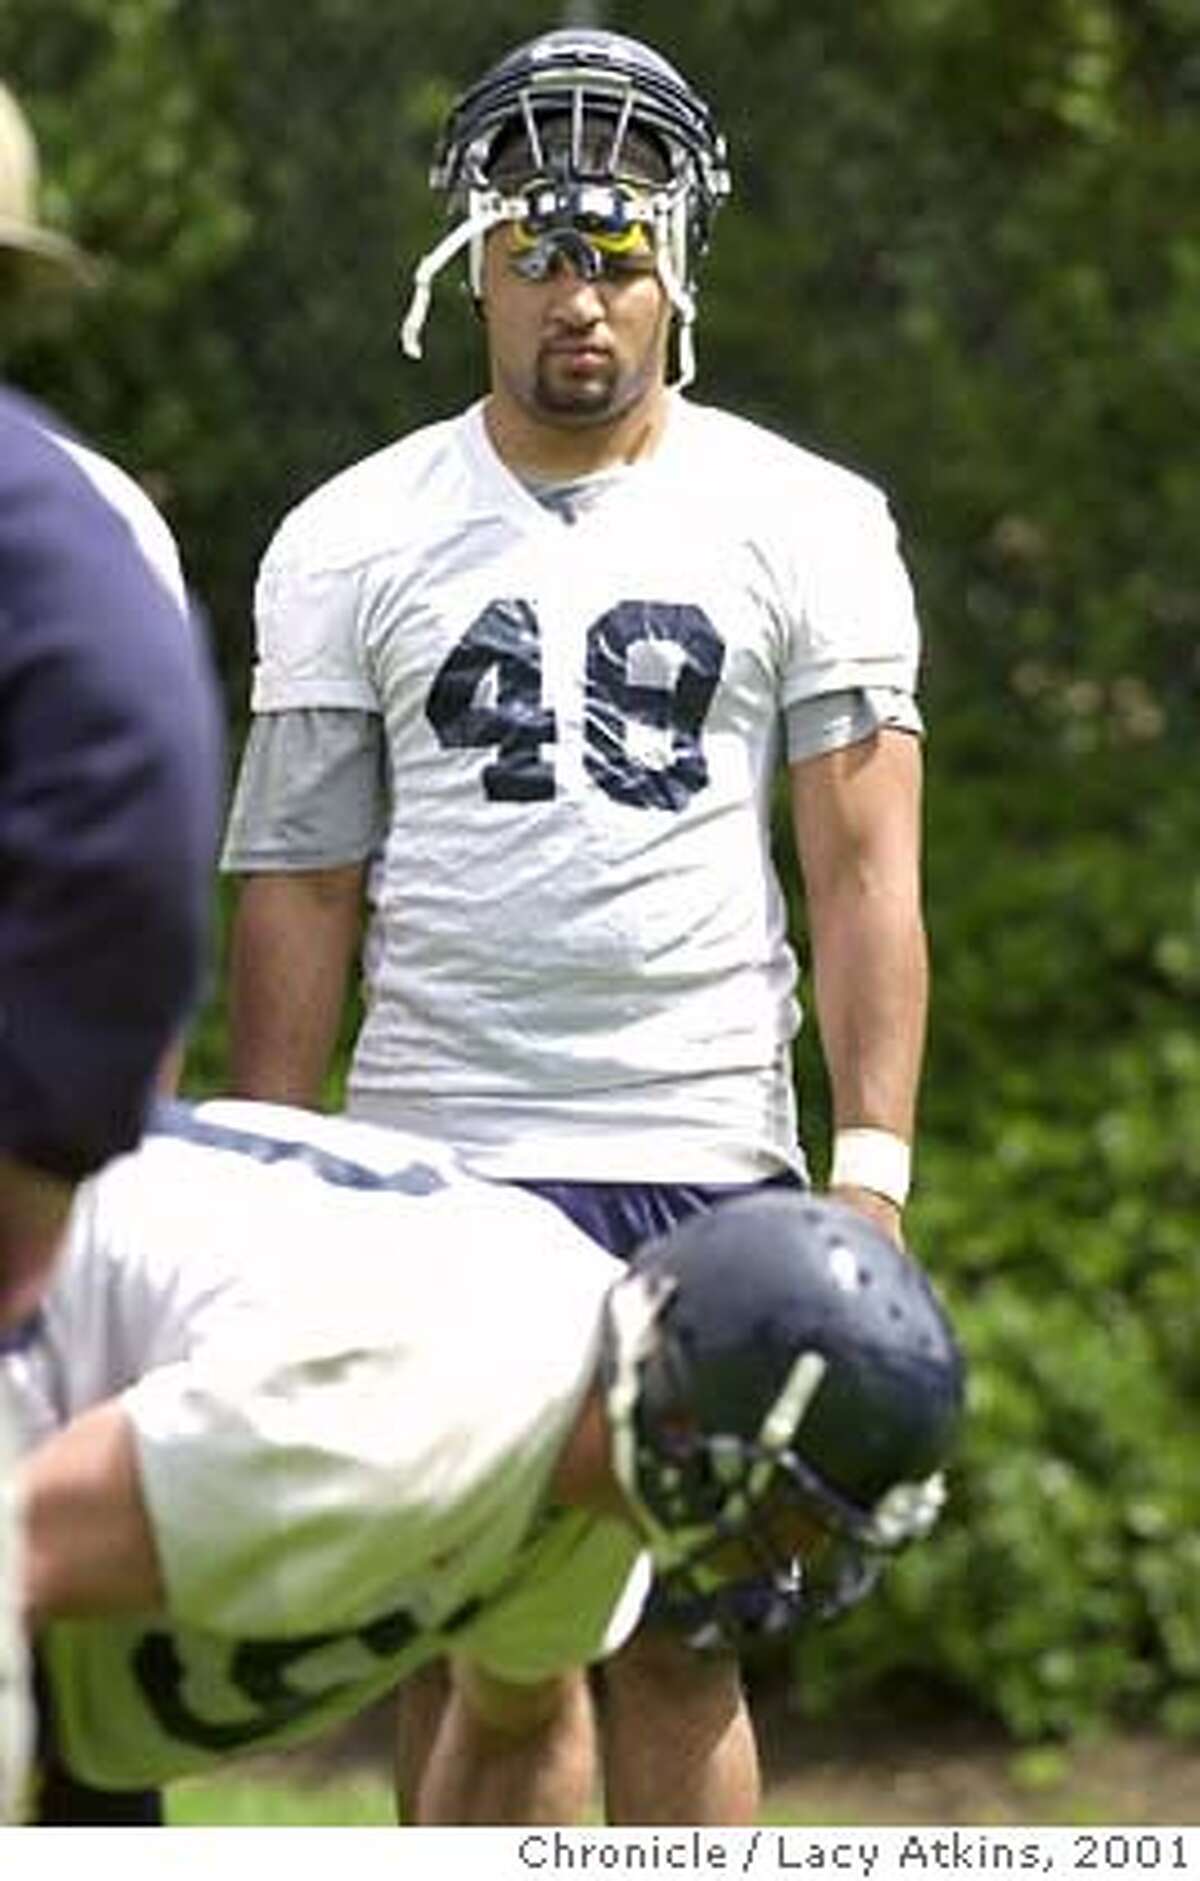 CALFOOTBALLi-C-11AUG01-SP-LA Tully Banta-Cain watches teammates during practice sunday Aug.12,01, in Berkeley. Photo By Lacy Atkins/SanFrancisco Chronicle CAT